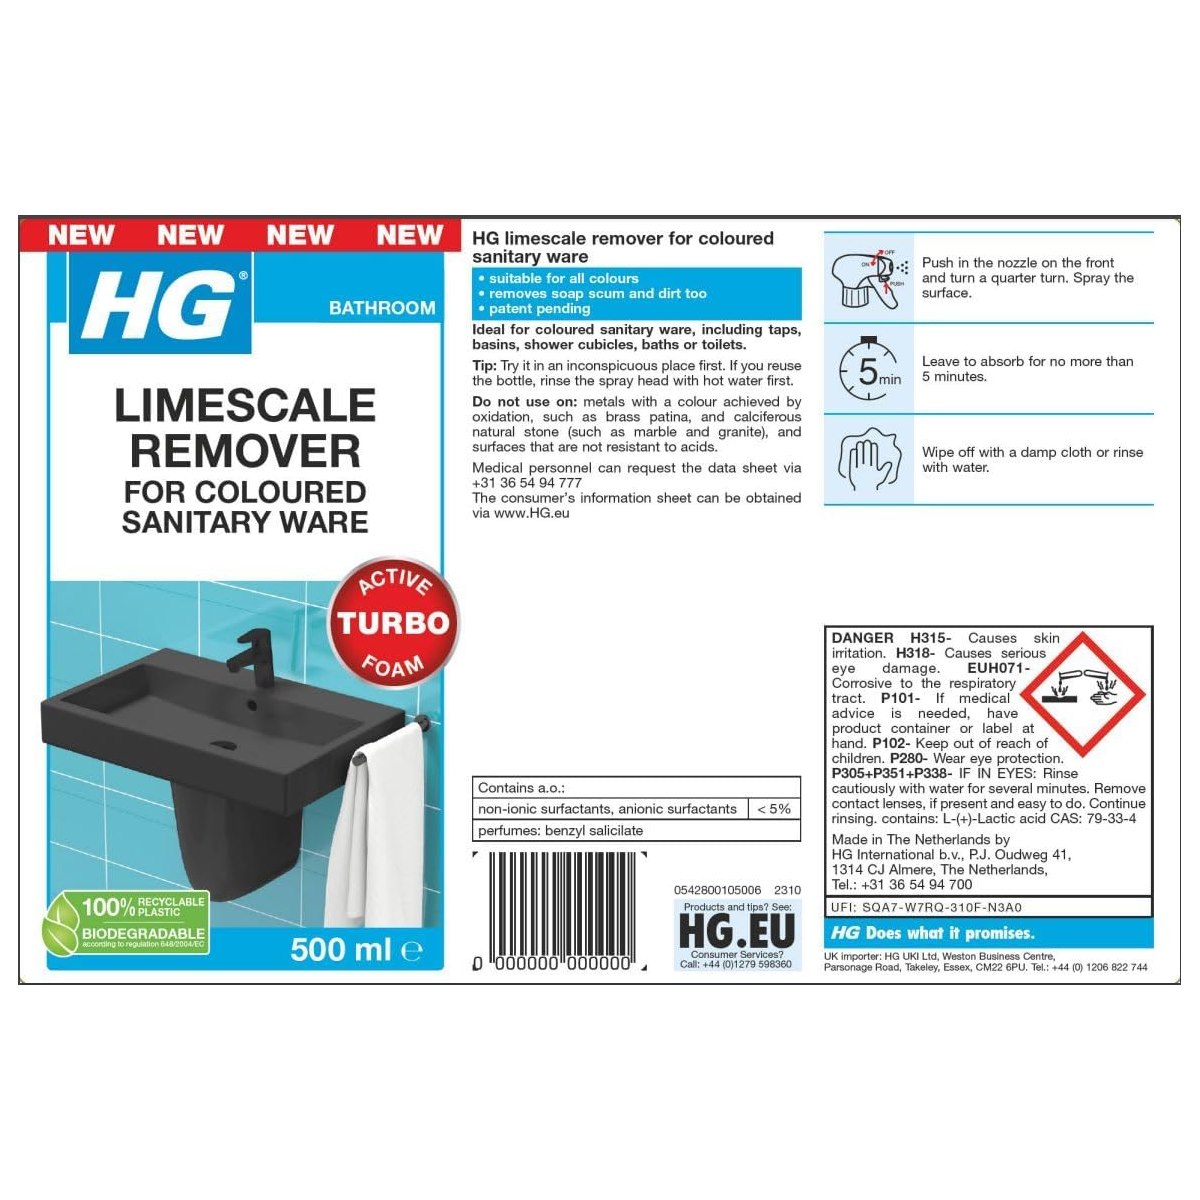 How to use HG Limescale Remover For Coloured Sanitary Ware